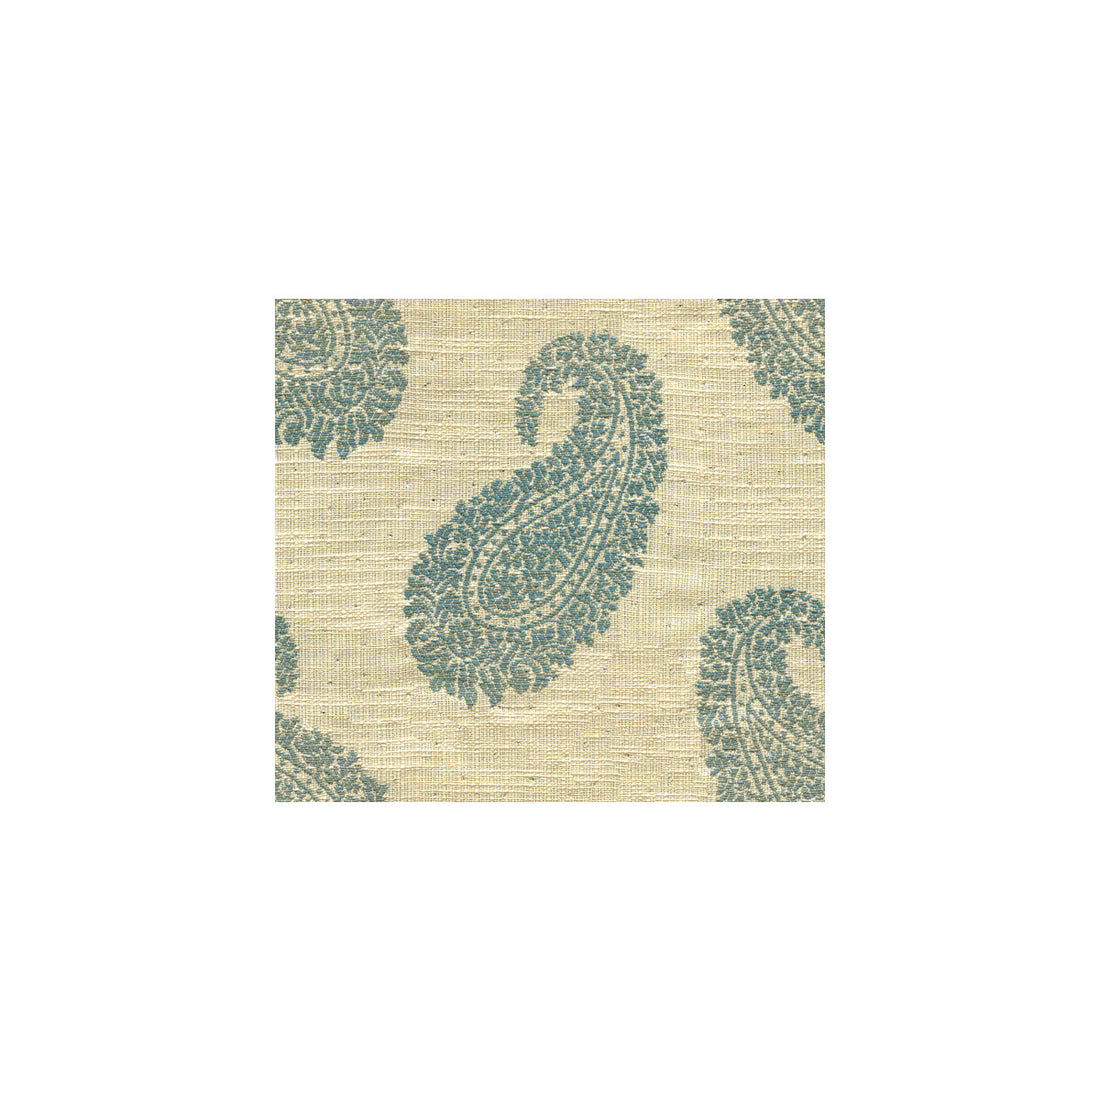 Anjera fabric in grace color - pattern 32477.15.0 - by Kravet Contract in the Candice Olson collection